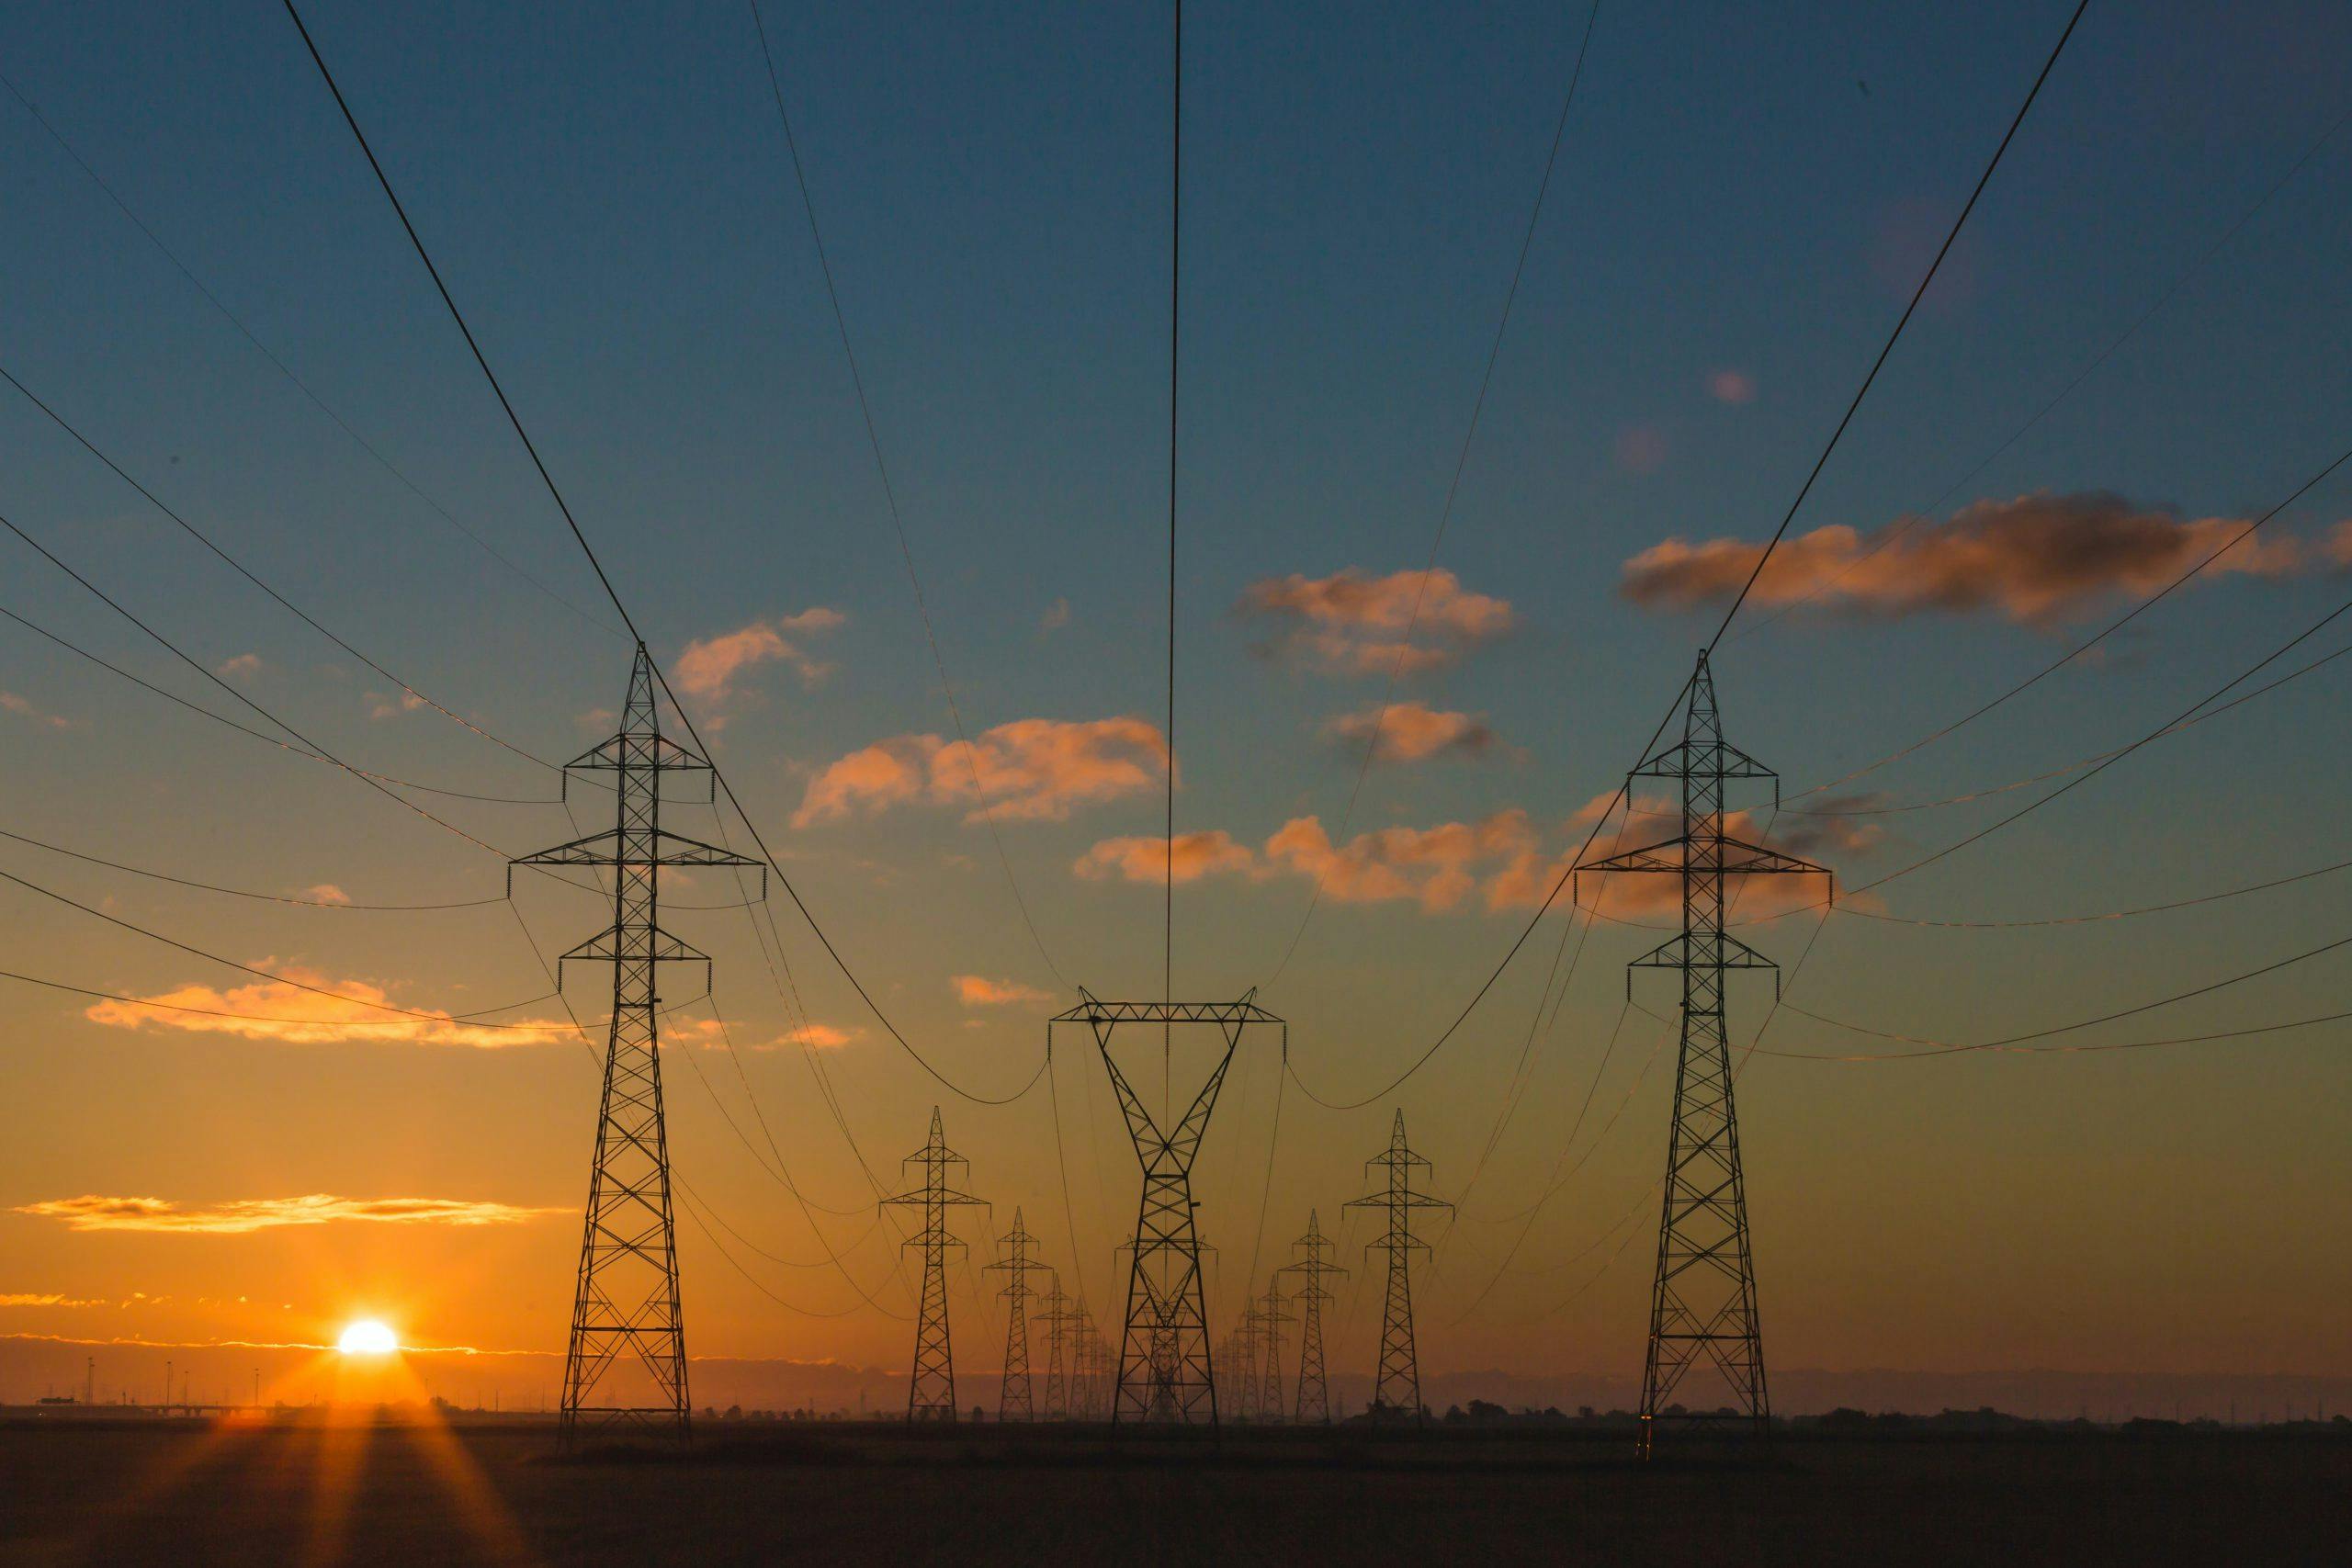 sunset image of power lines reaching into the distance along a flat landscape